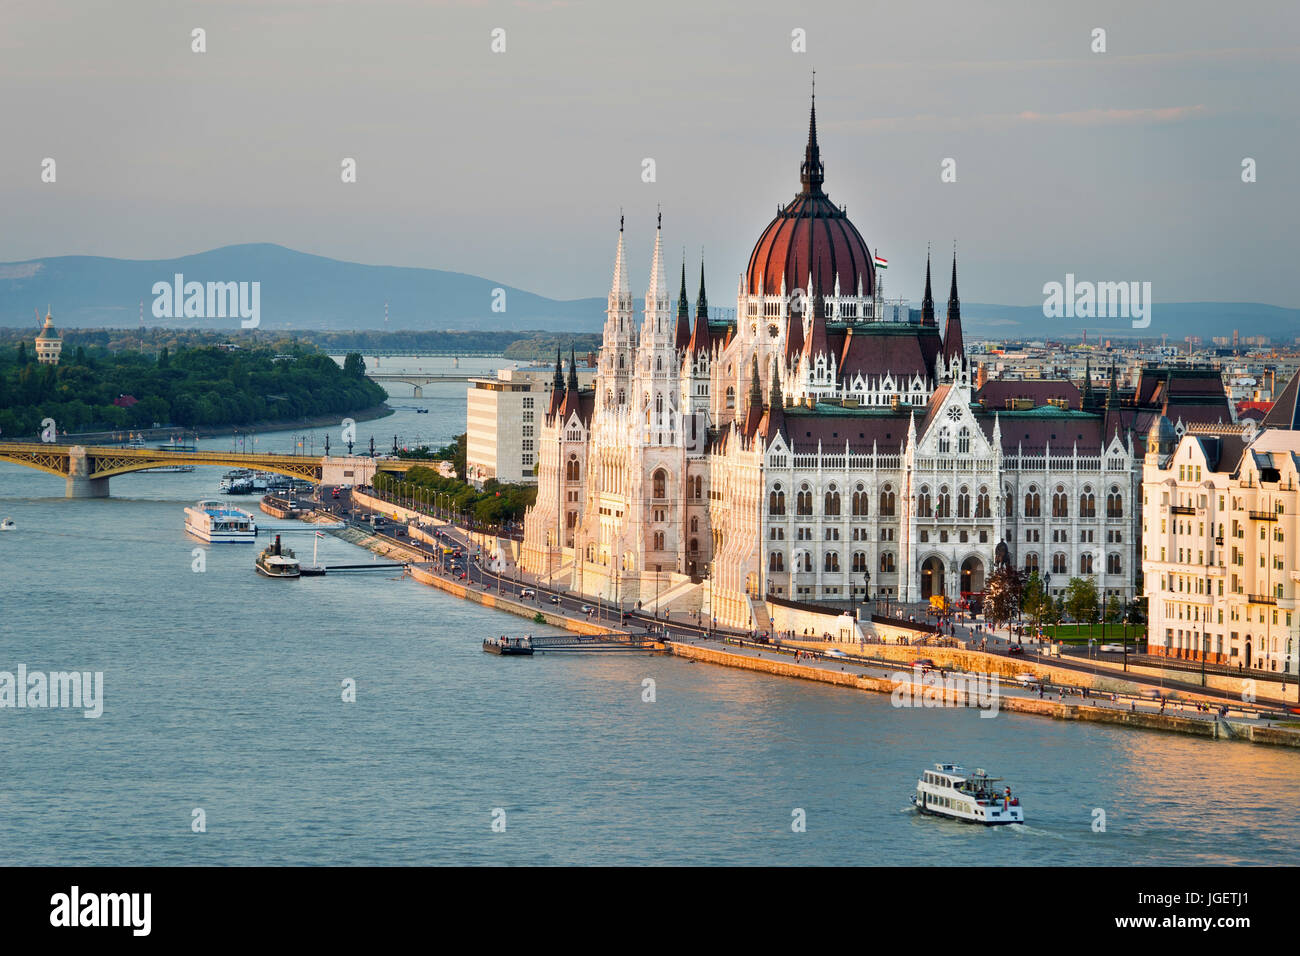 The Beautiful Capital City of Budapest in Hungary Stock Photo